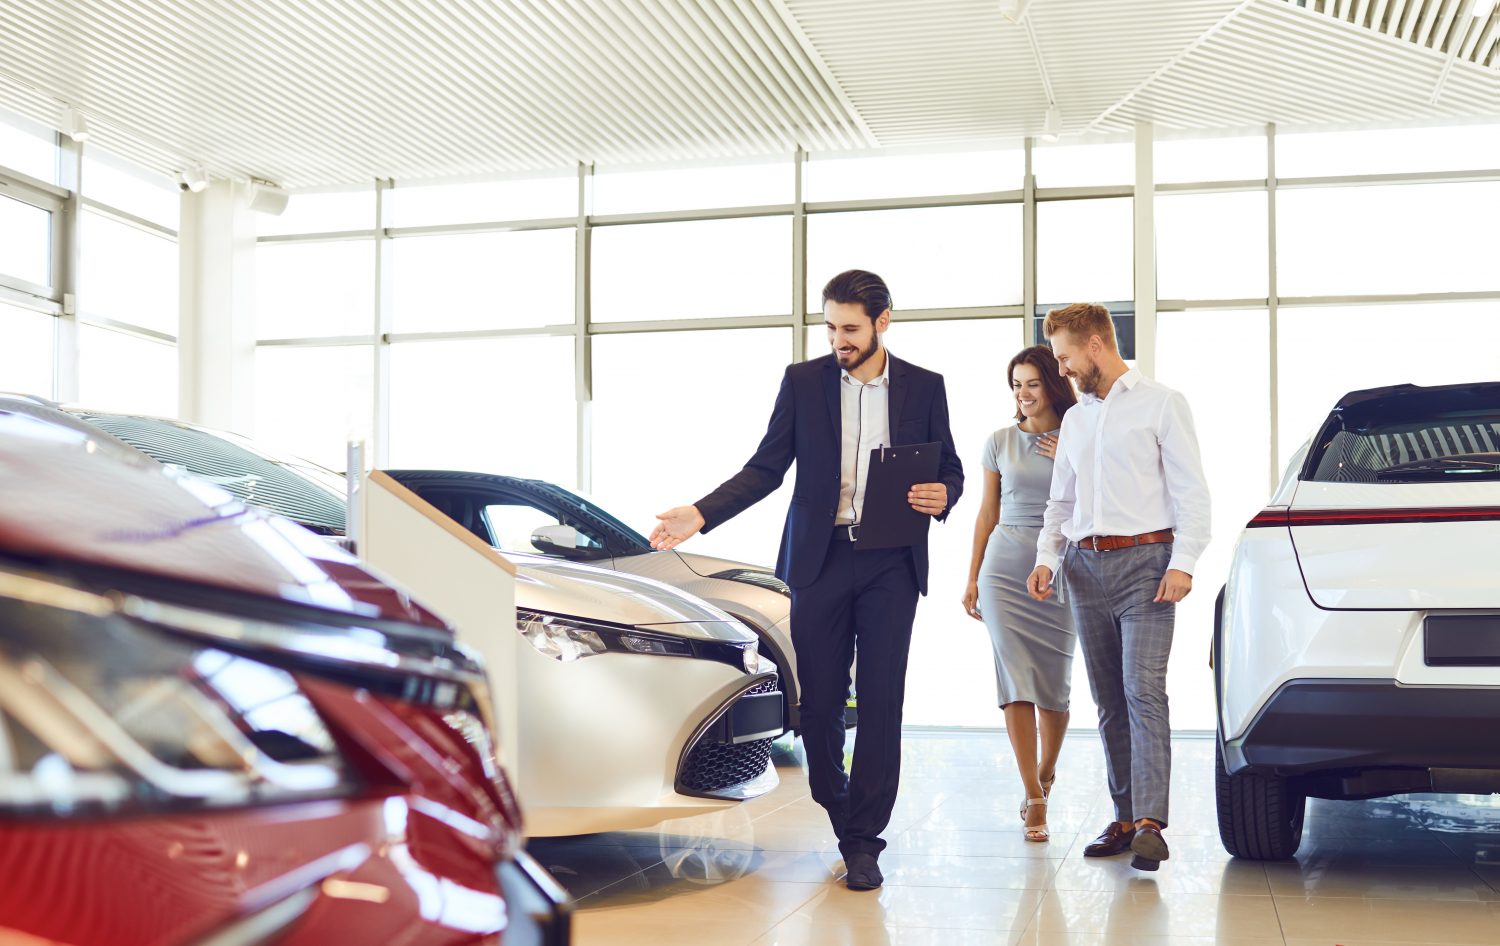 To succeed in the evolving automotive retail environment, dealers must adapt to changing market conditions and refine their strategies.